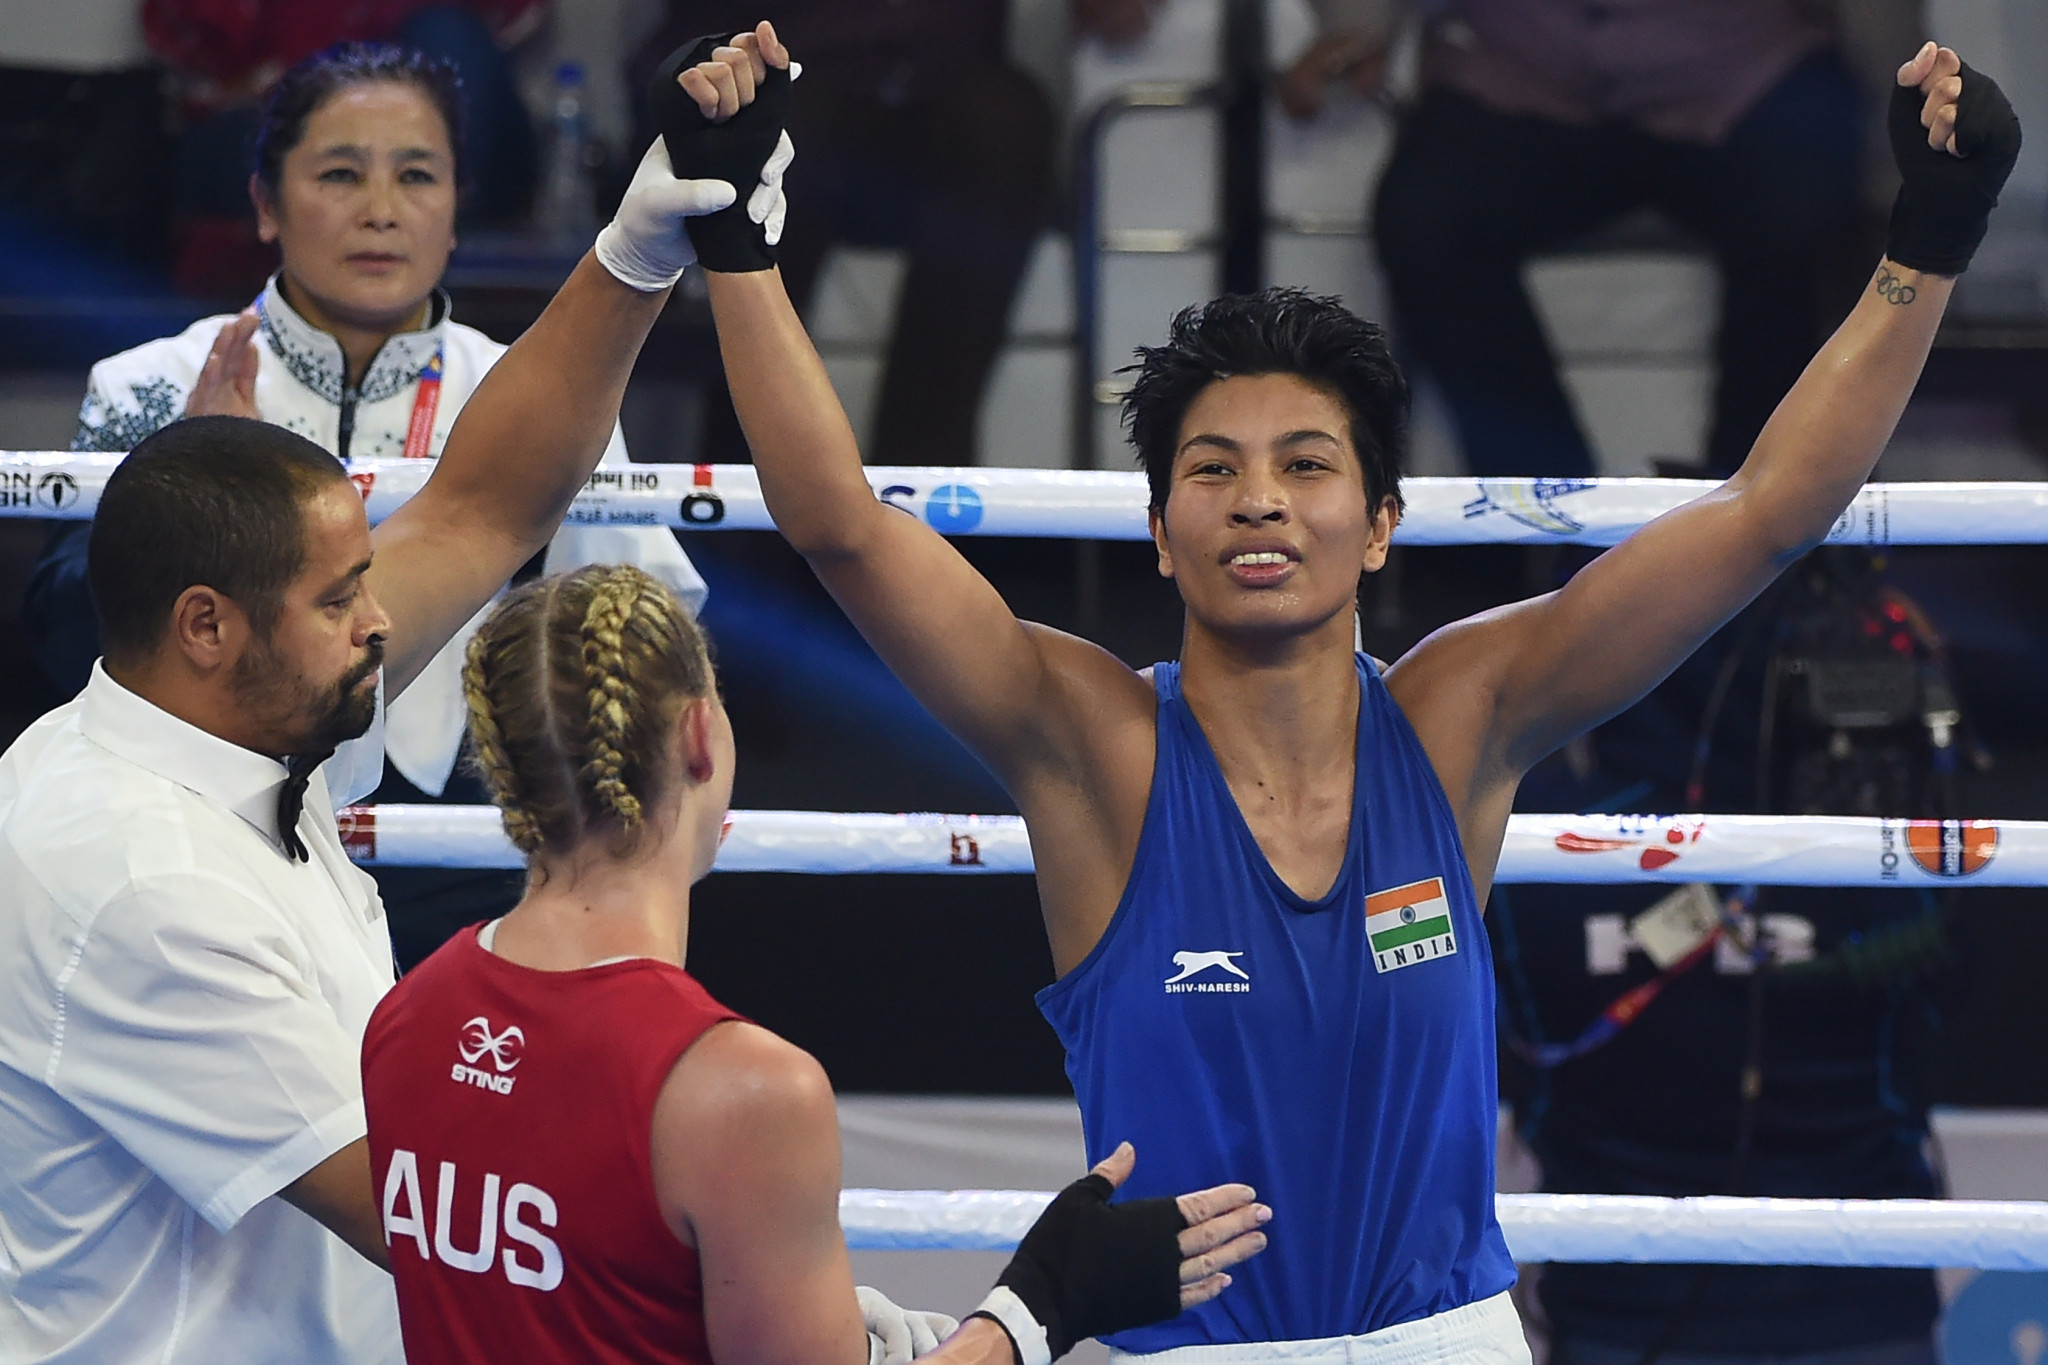 Two-time world boxing bronze medallist Lovlina Borgohain has been helping those struggling in India due to the coronavirus pandemic ©Getty Images